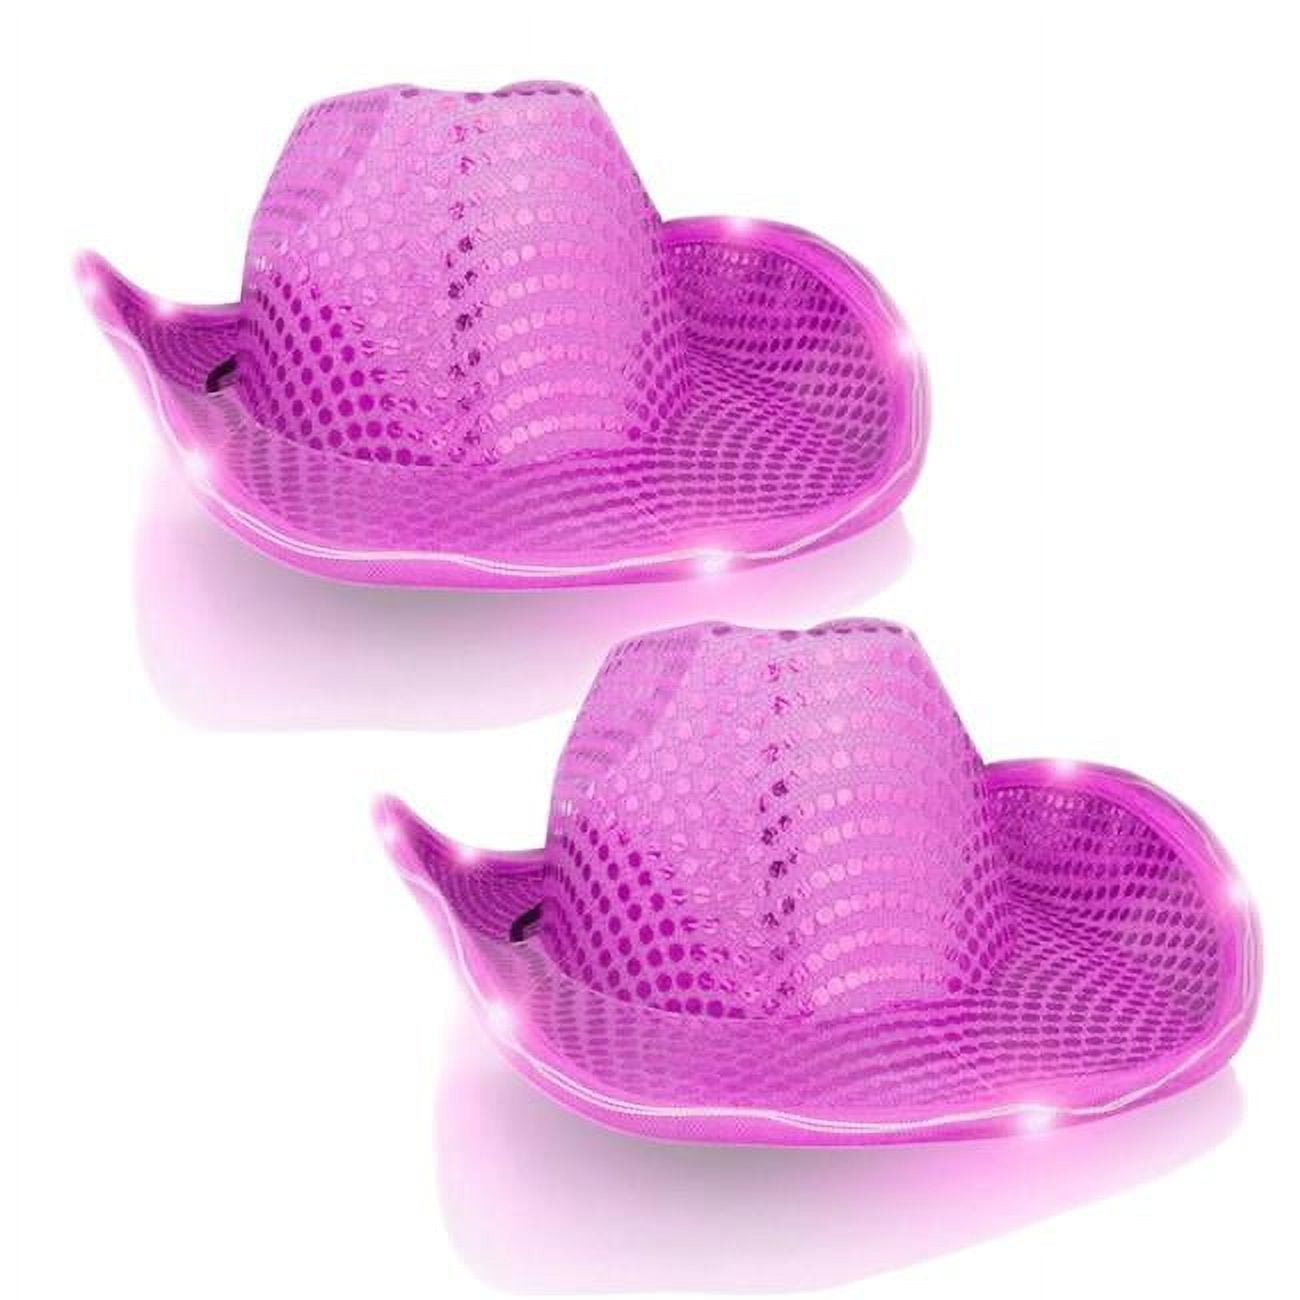 blinkee 3996500-P2 LED Flashing Cowboy Hat with Pink Sequins - Pack of 2